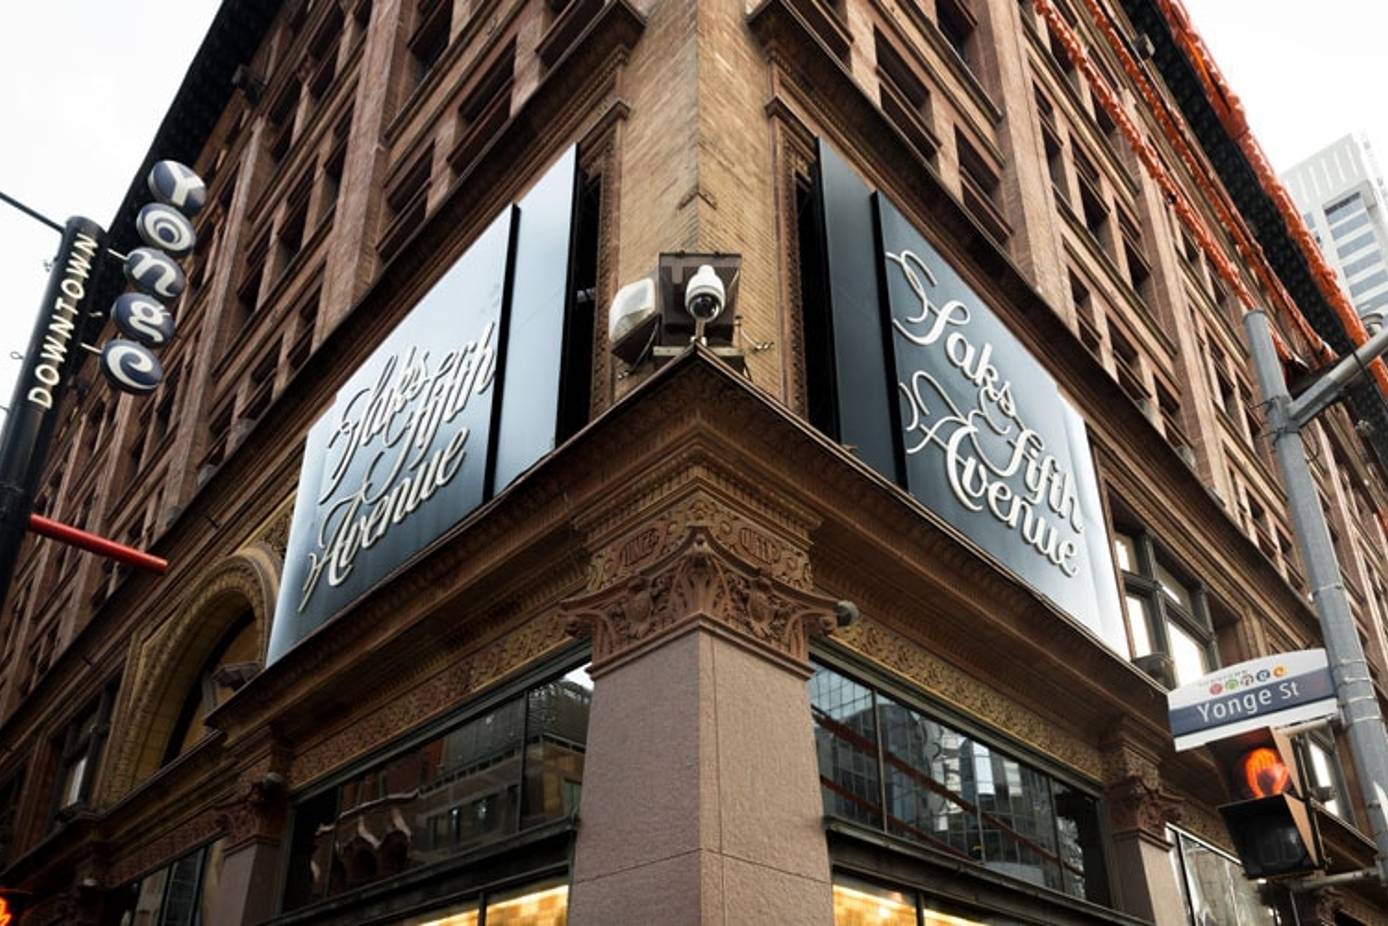 Saks Fifth Avenue Outlet Opens First Downtown Store